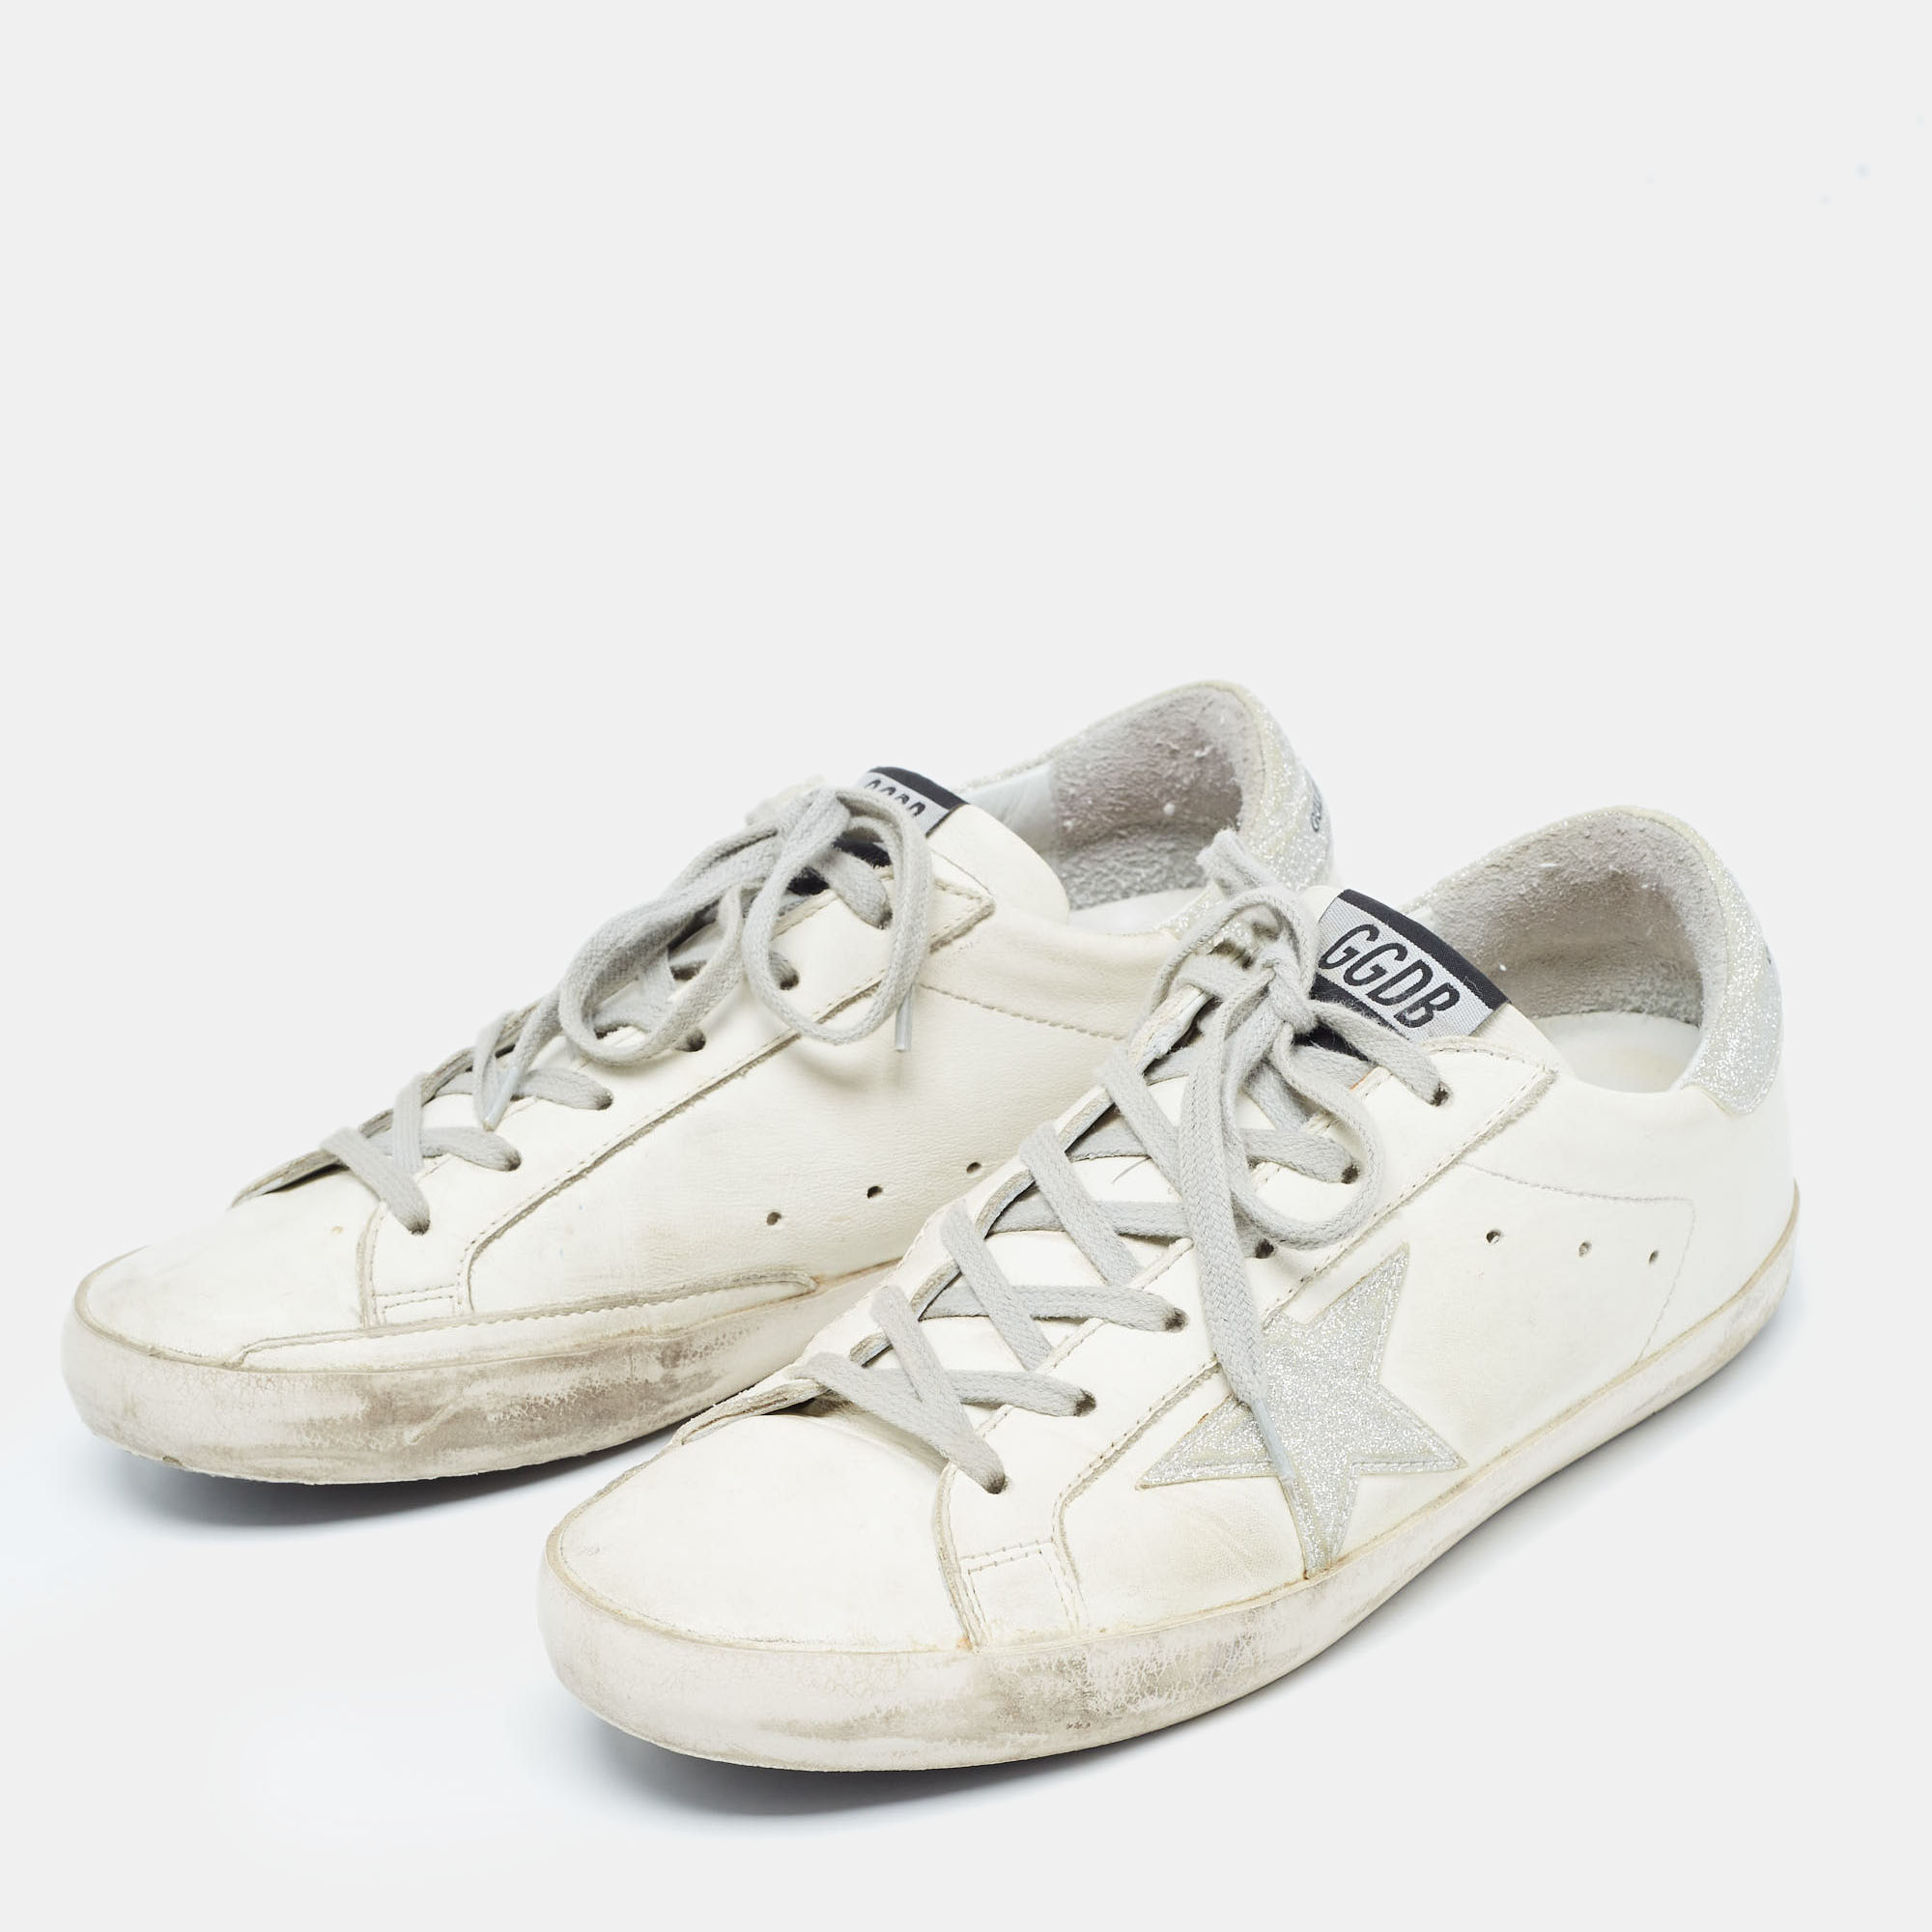 

Golden Goose White/Silver Glitter and Leather Superstar Sneakers Size